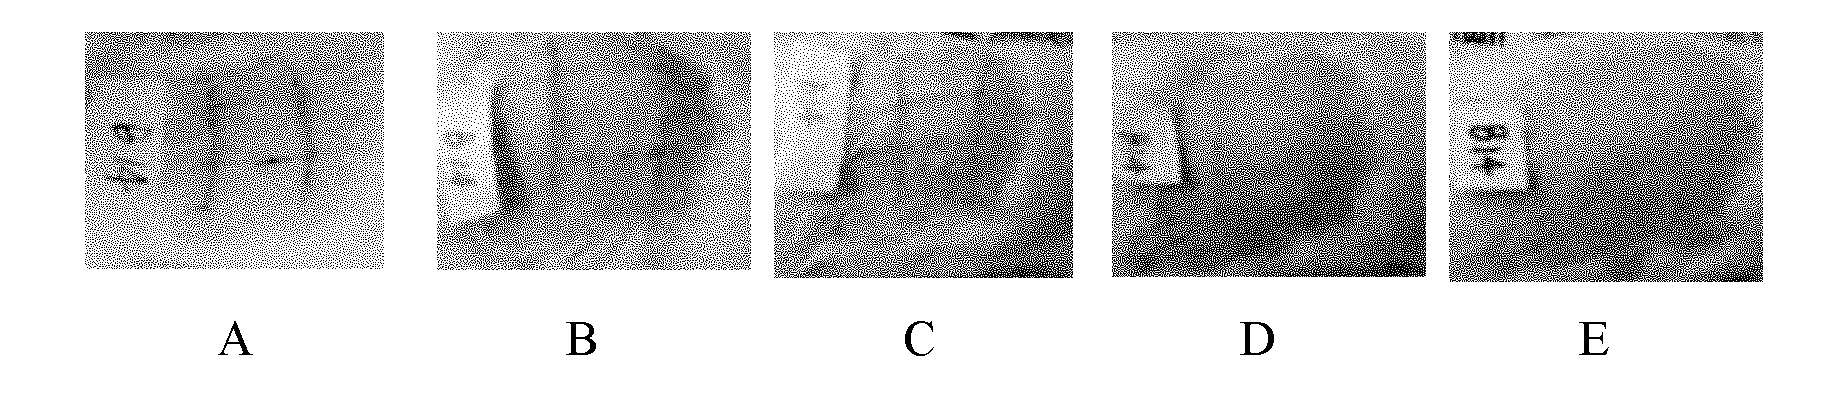 Hydrogel dressing containing recombinant human epidermal growth factor and preparation method and application thereof